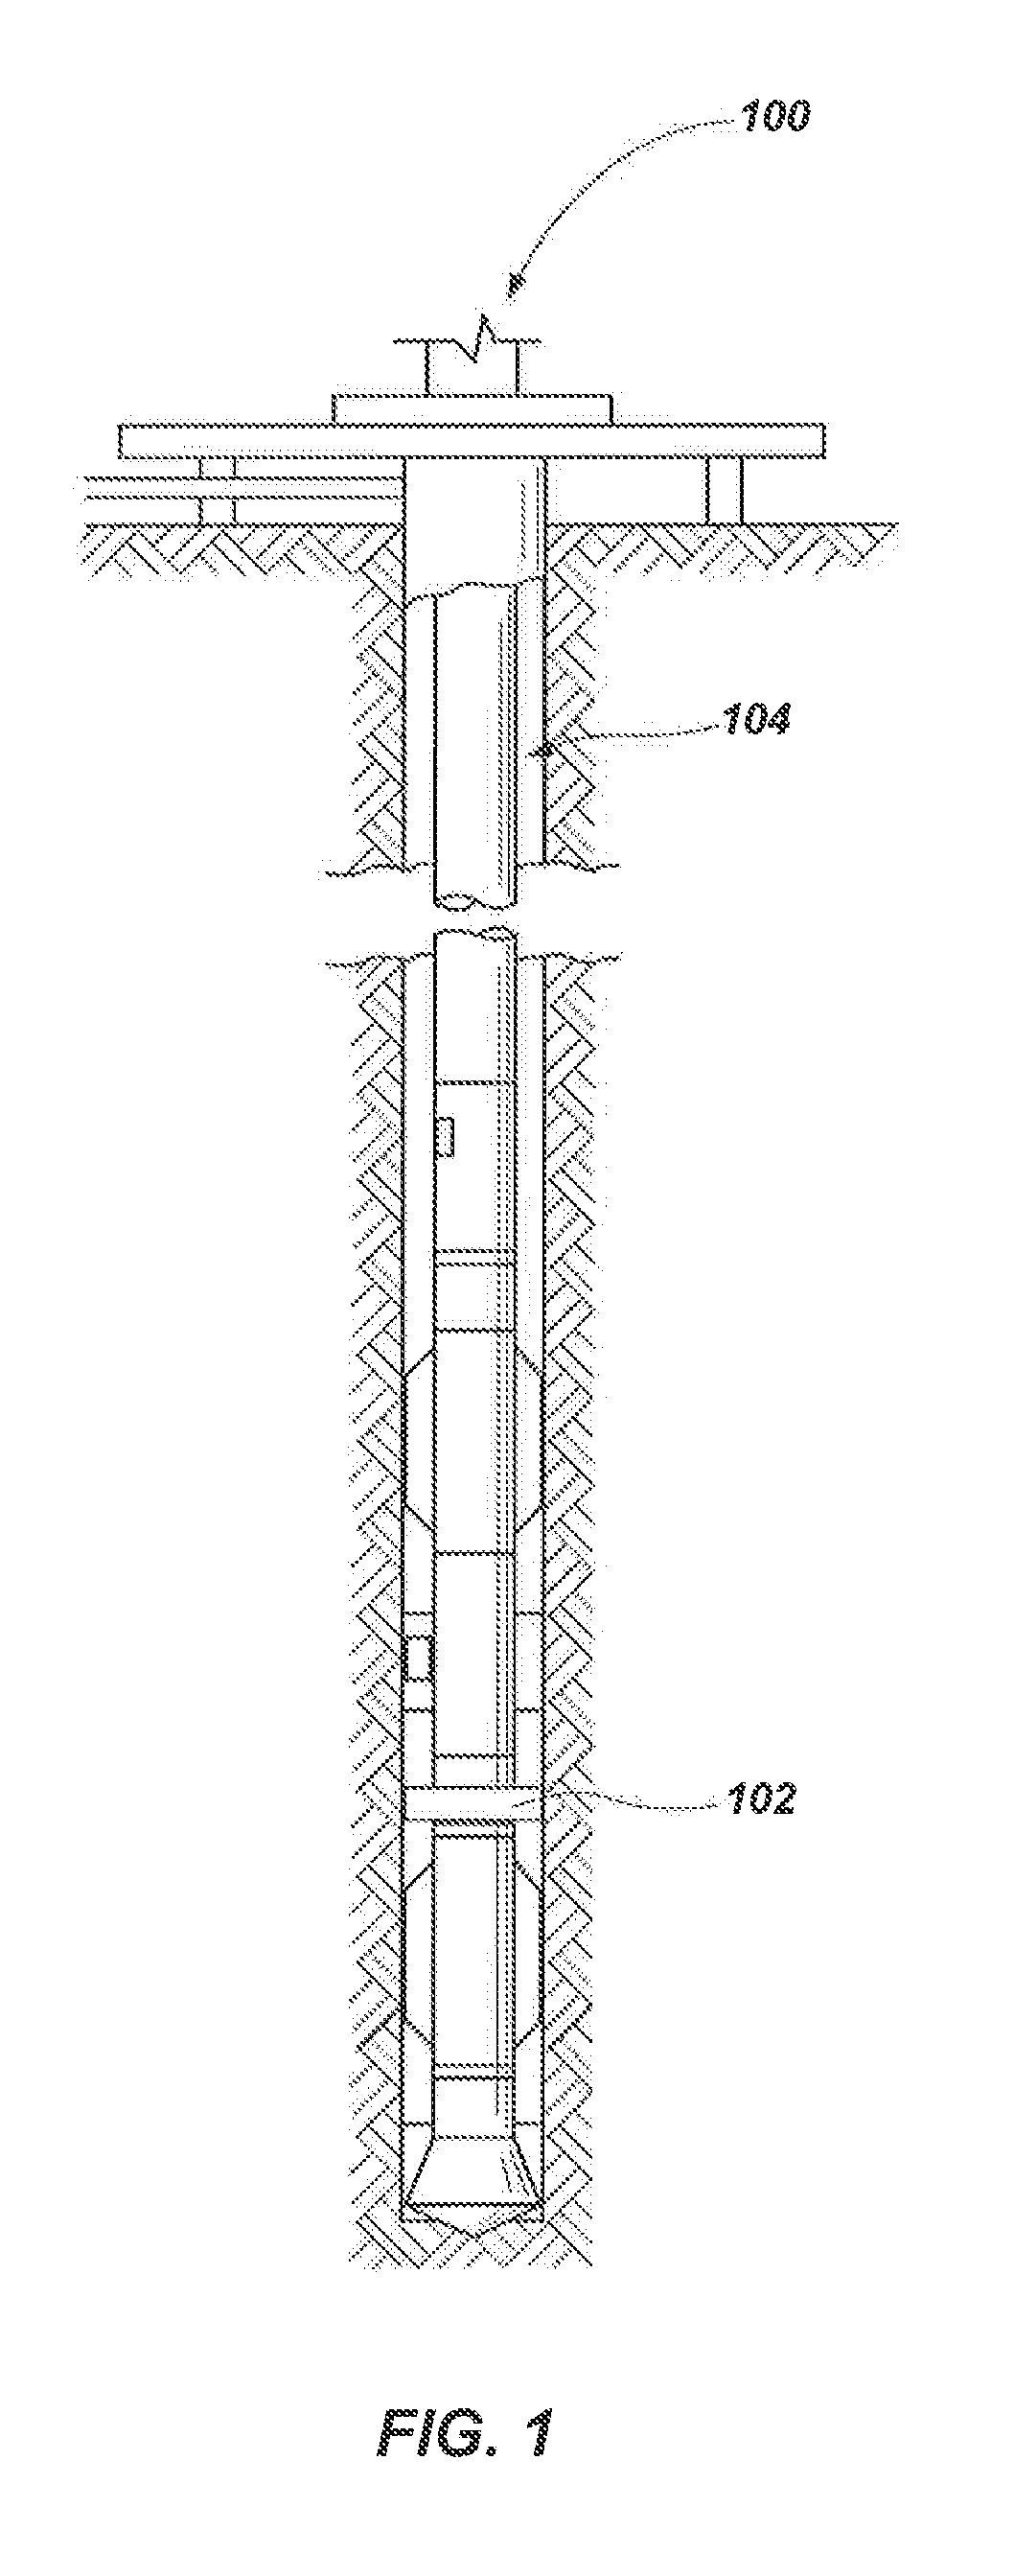 Superelastic nickel-titanium alloy downhole seals, wellbore tools including such seals, and related methods